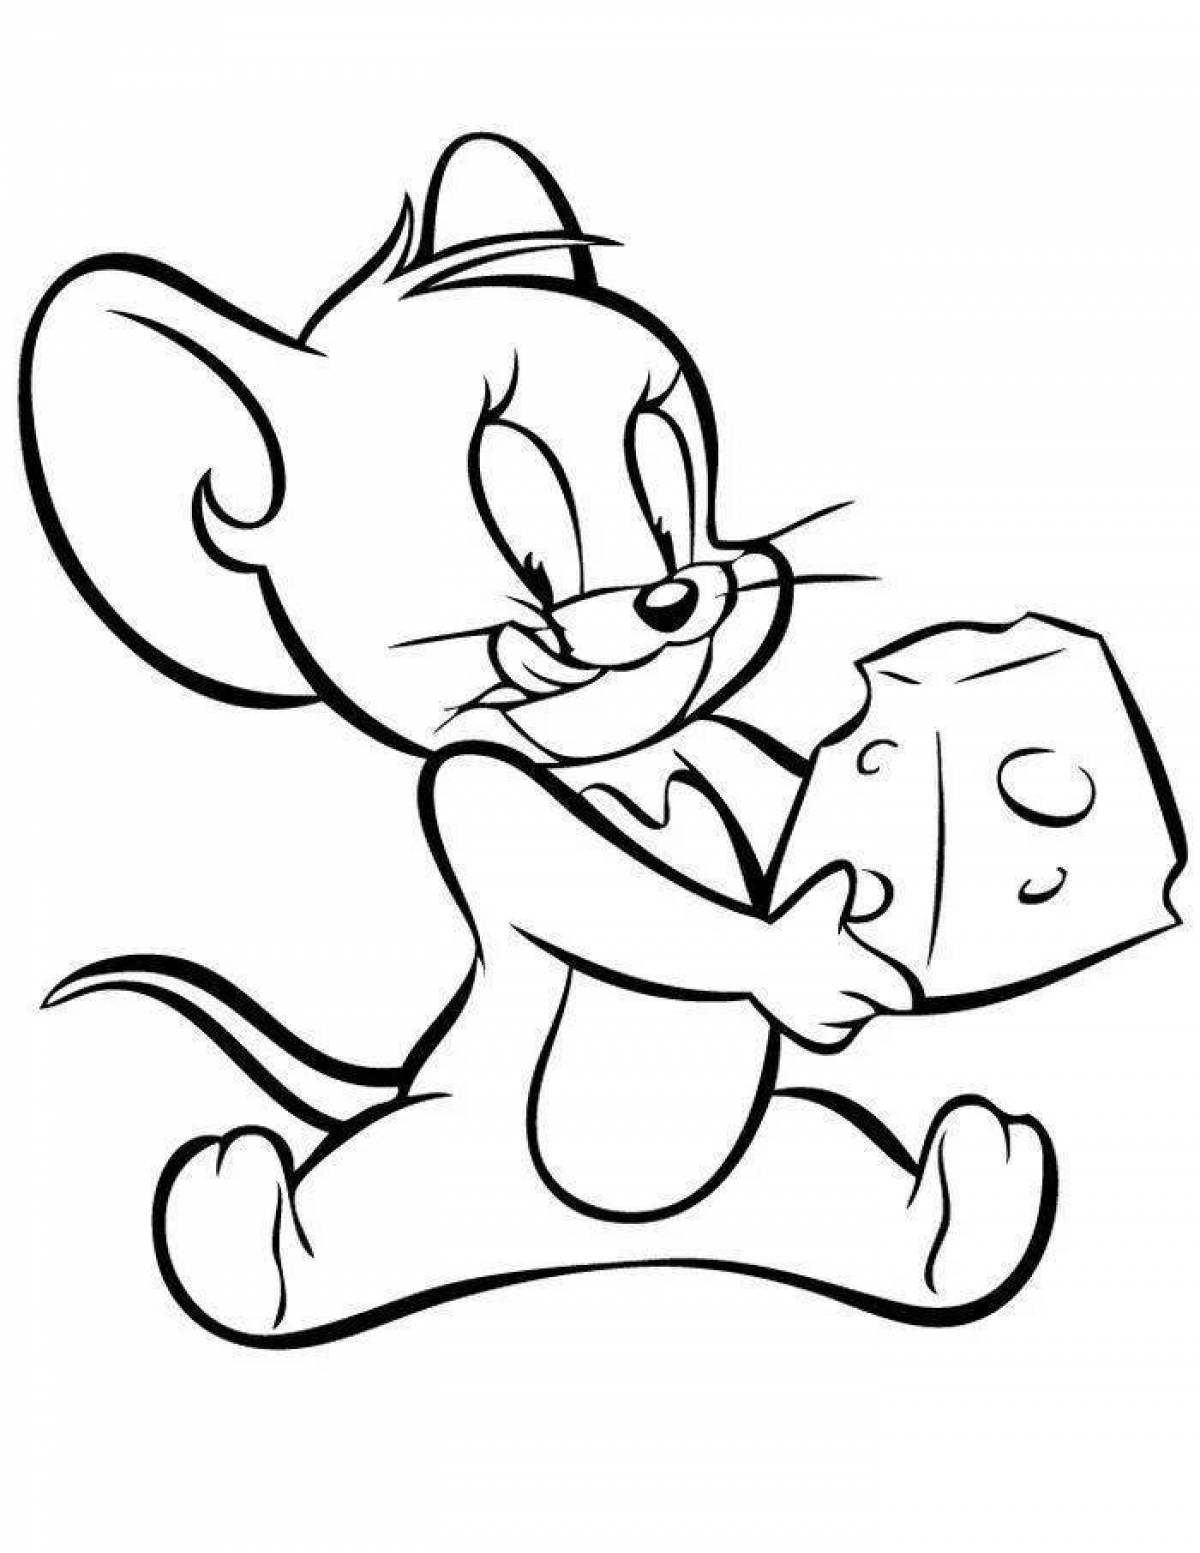 Grinning jerry coloring page